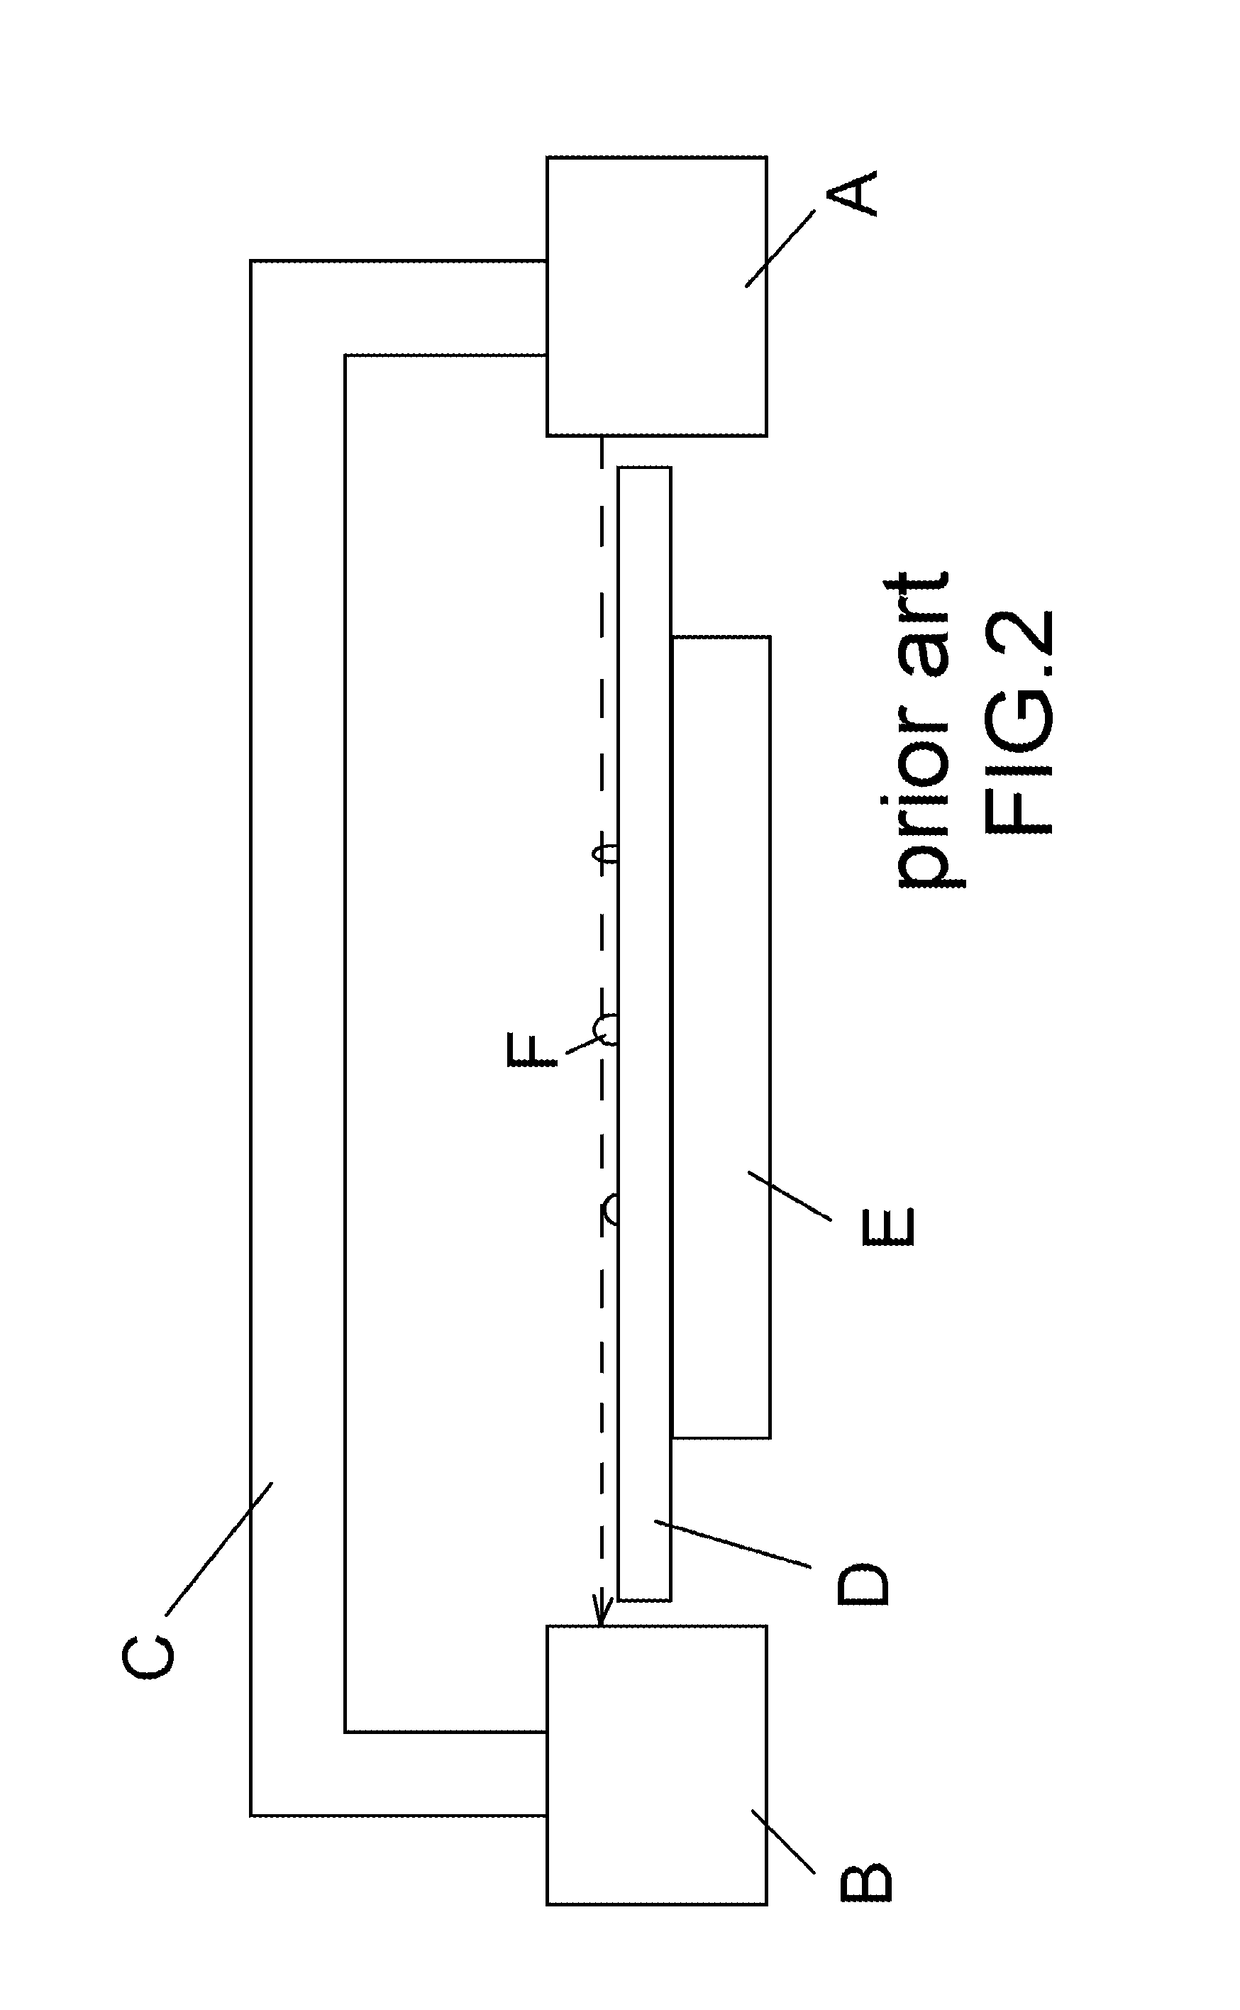 Apparatus for detecting heights of defects on optical glass